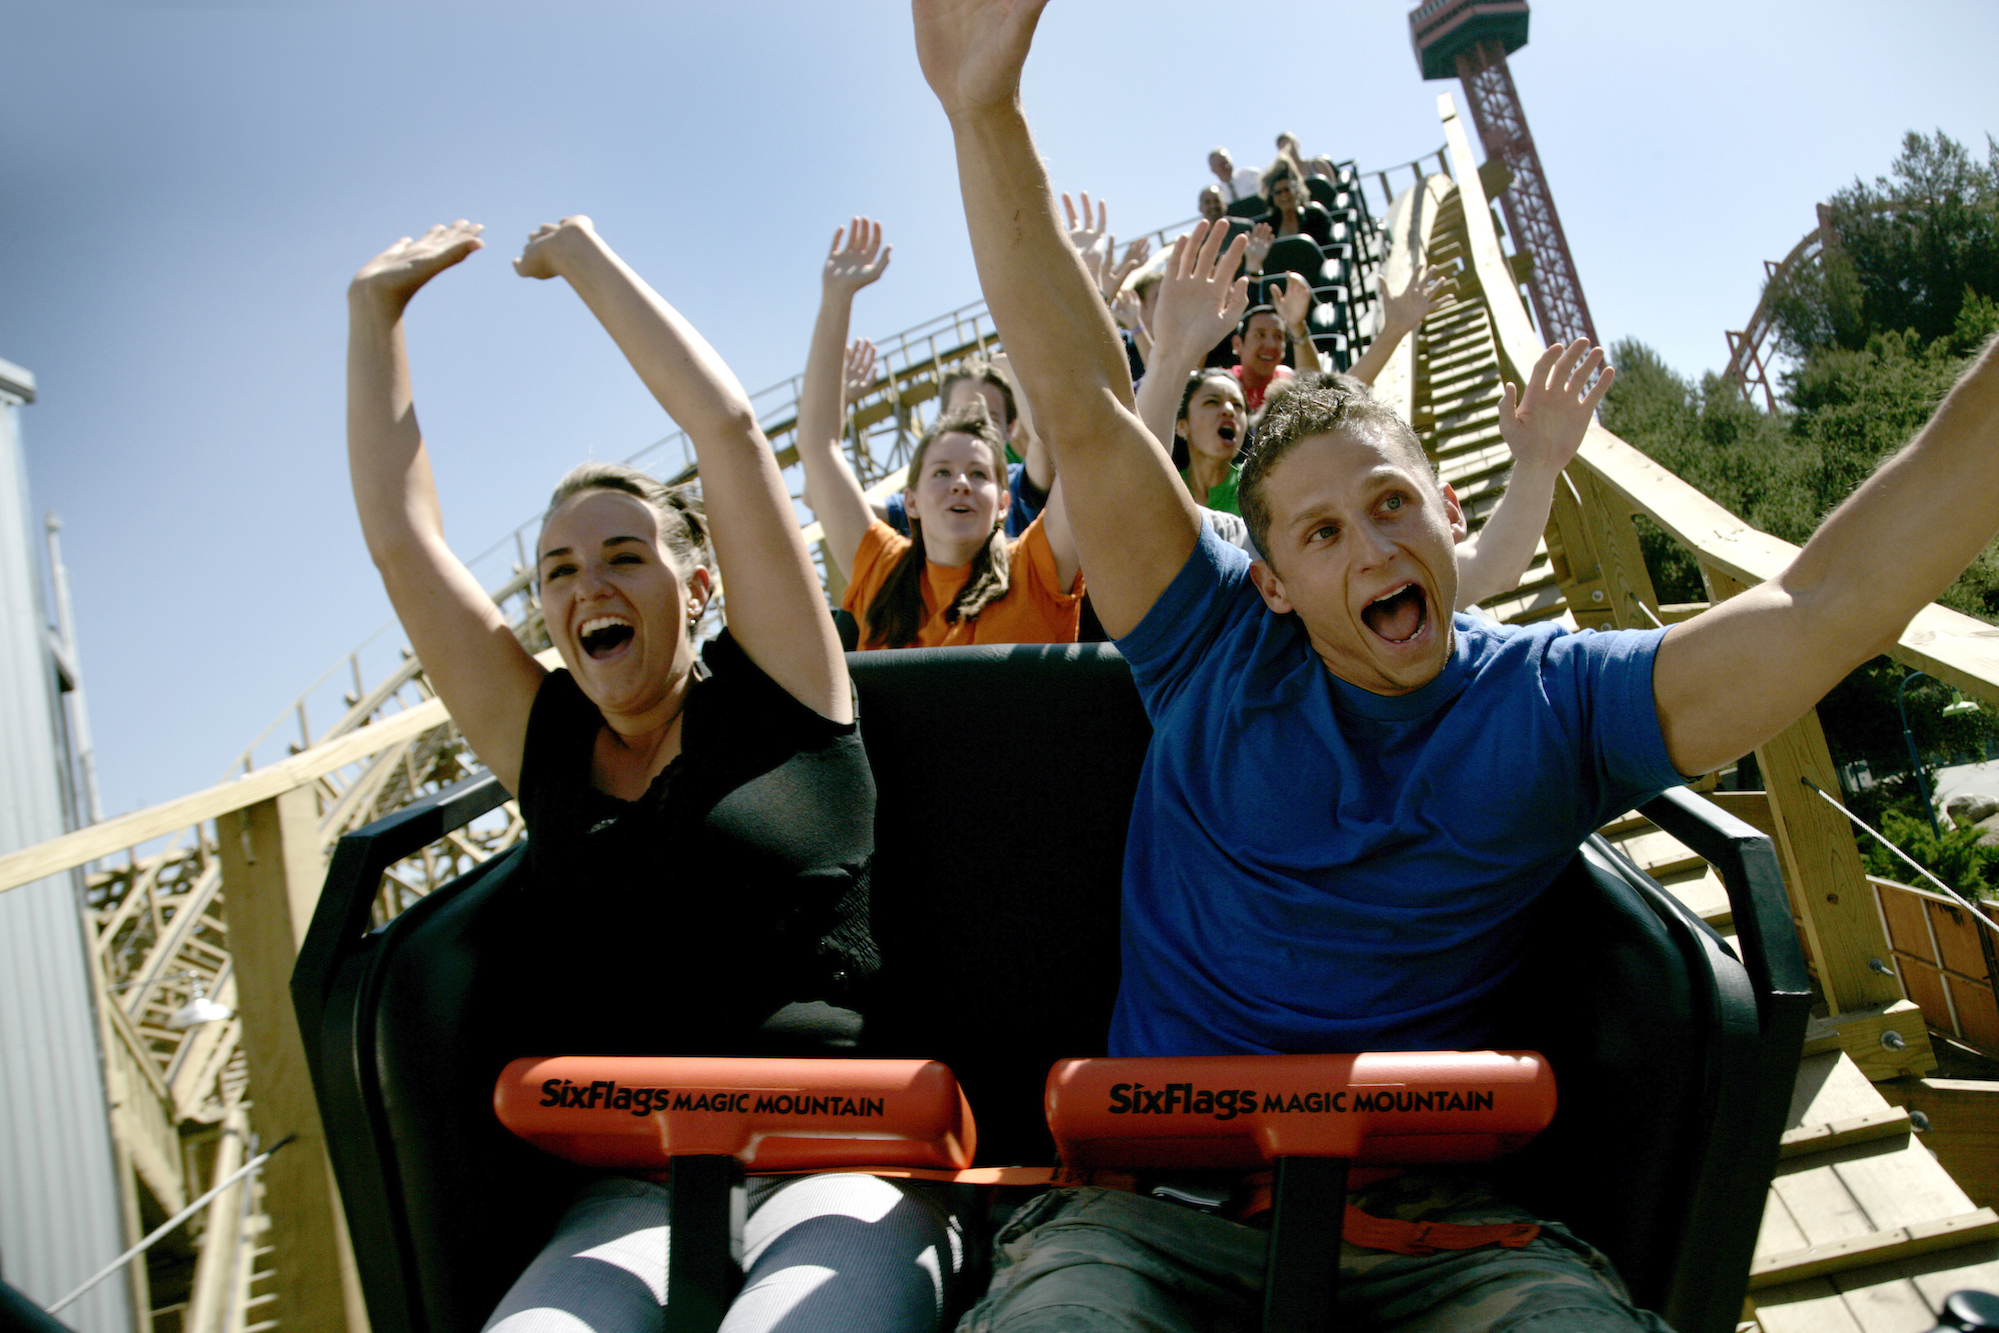 Park visitors with their arms raised on Apocalypse at Six Flags Magic Mountain